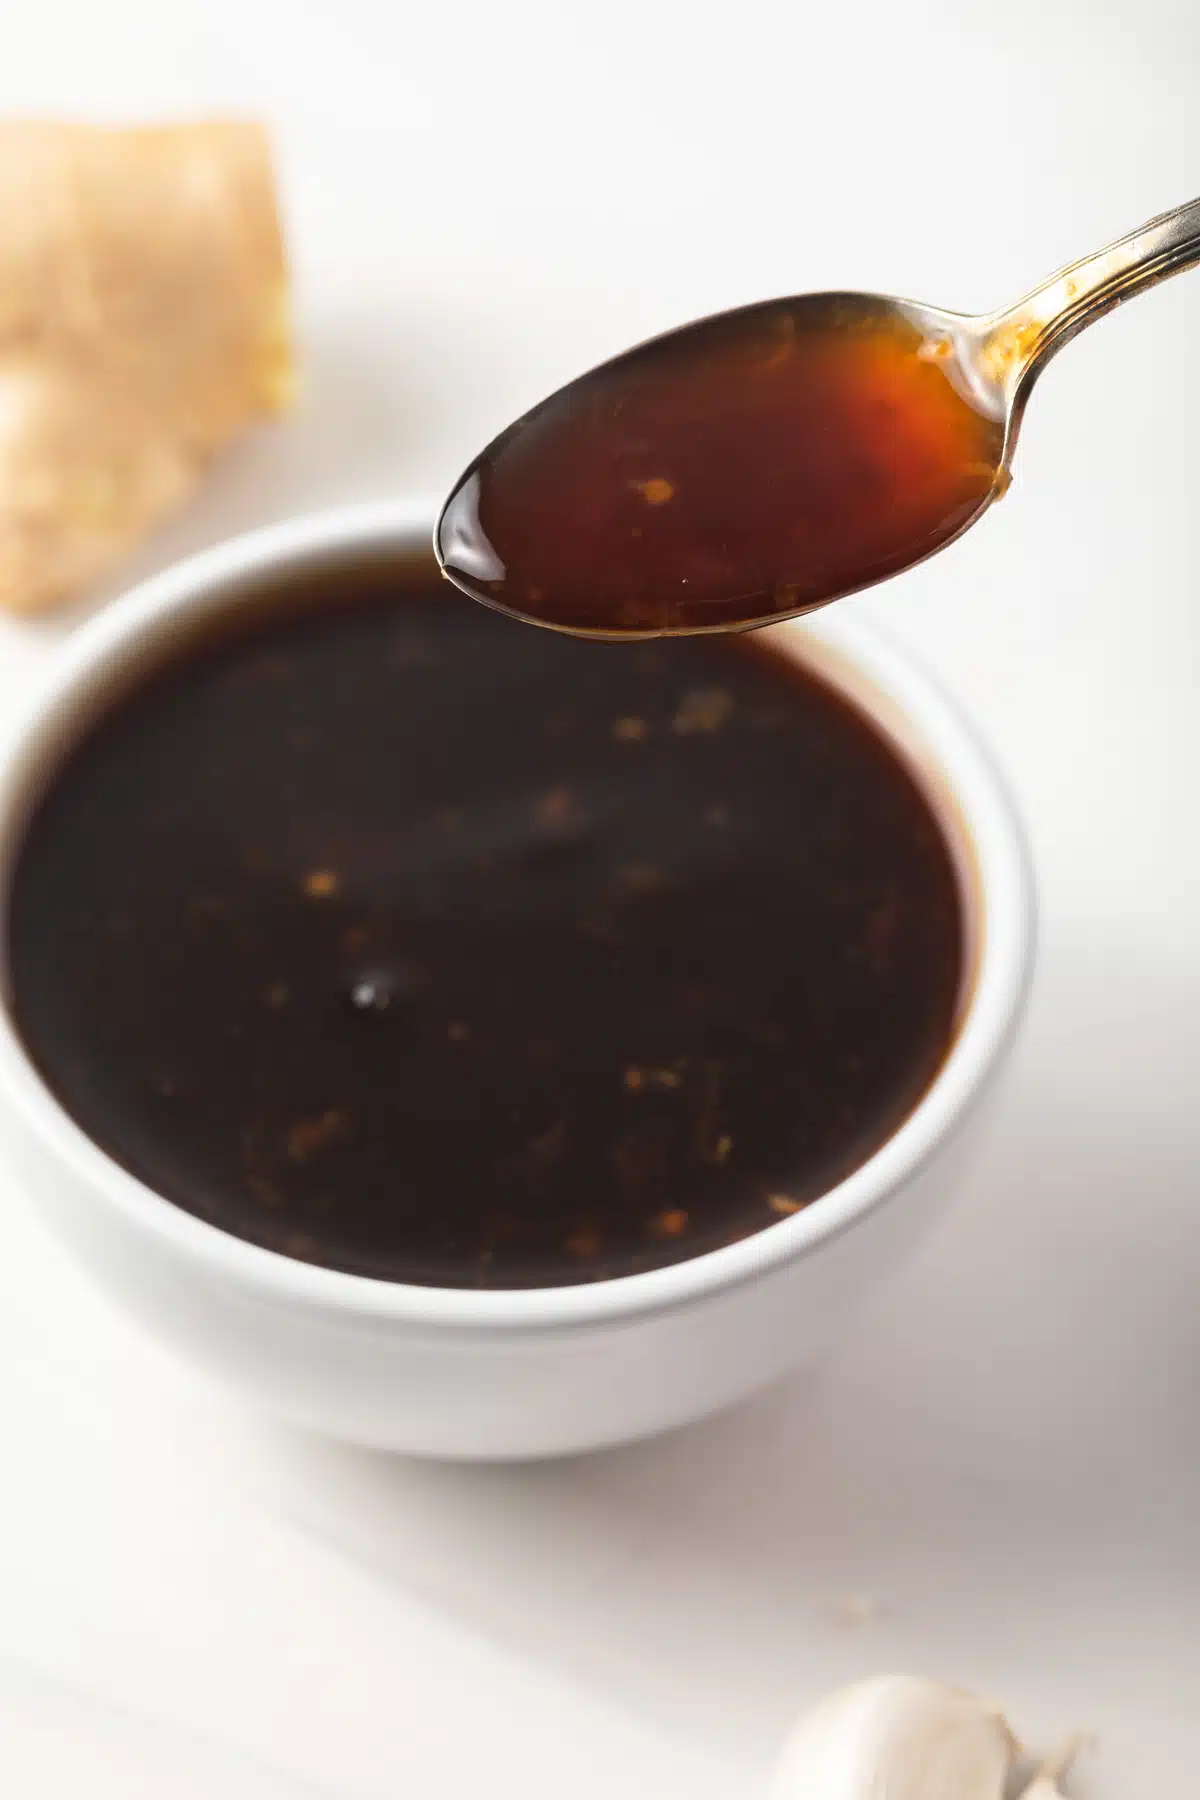 A spoon taking teriyaki sauce out of a white bowl.